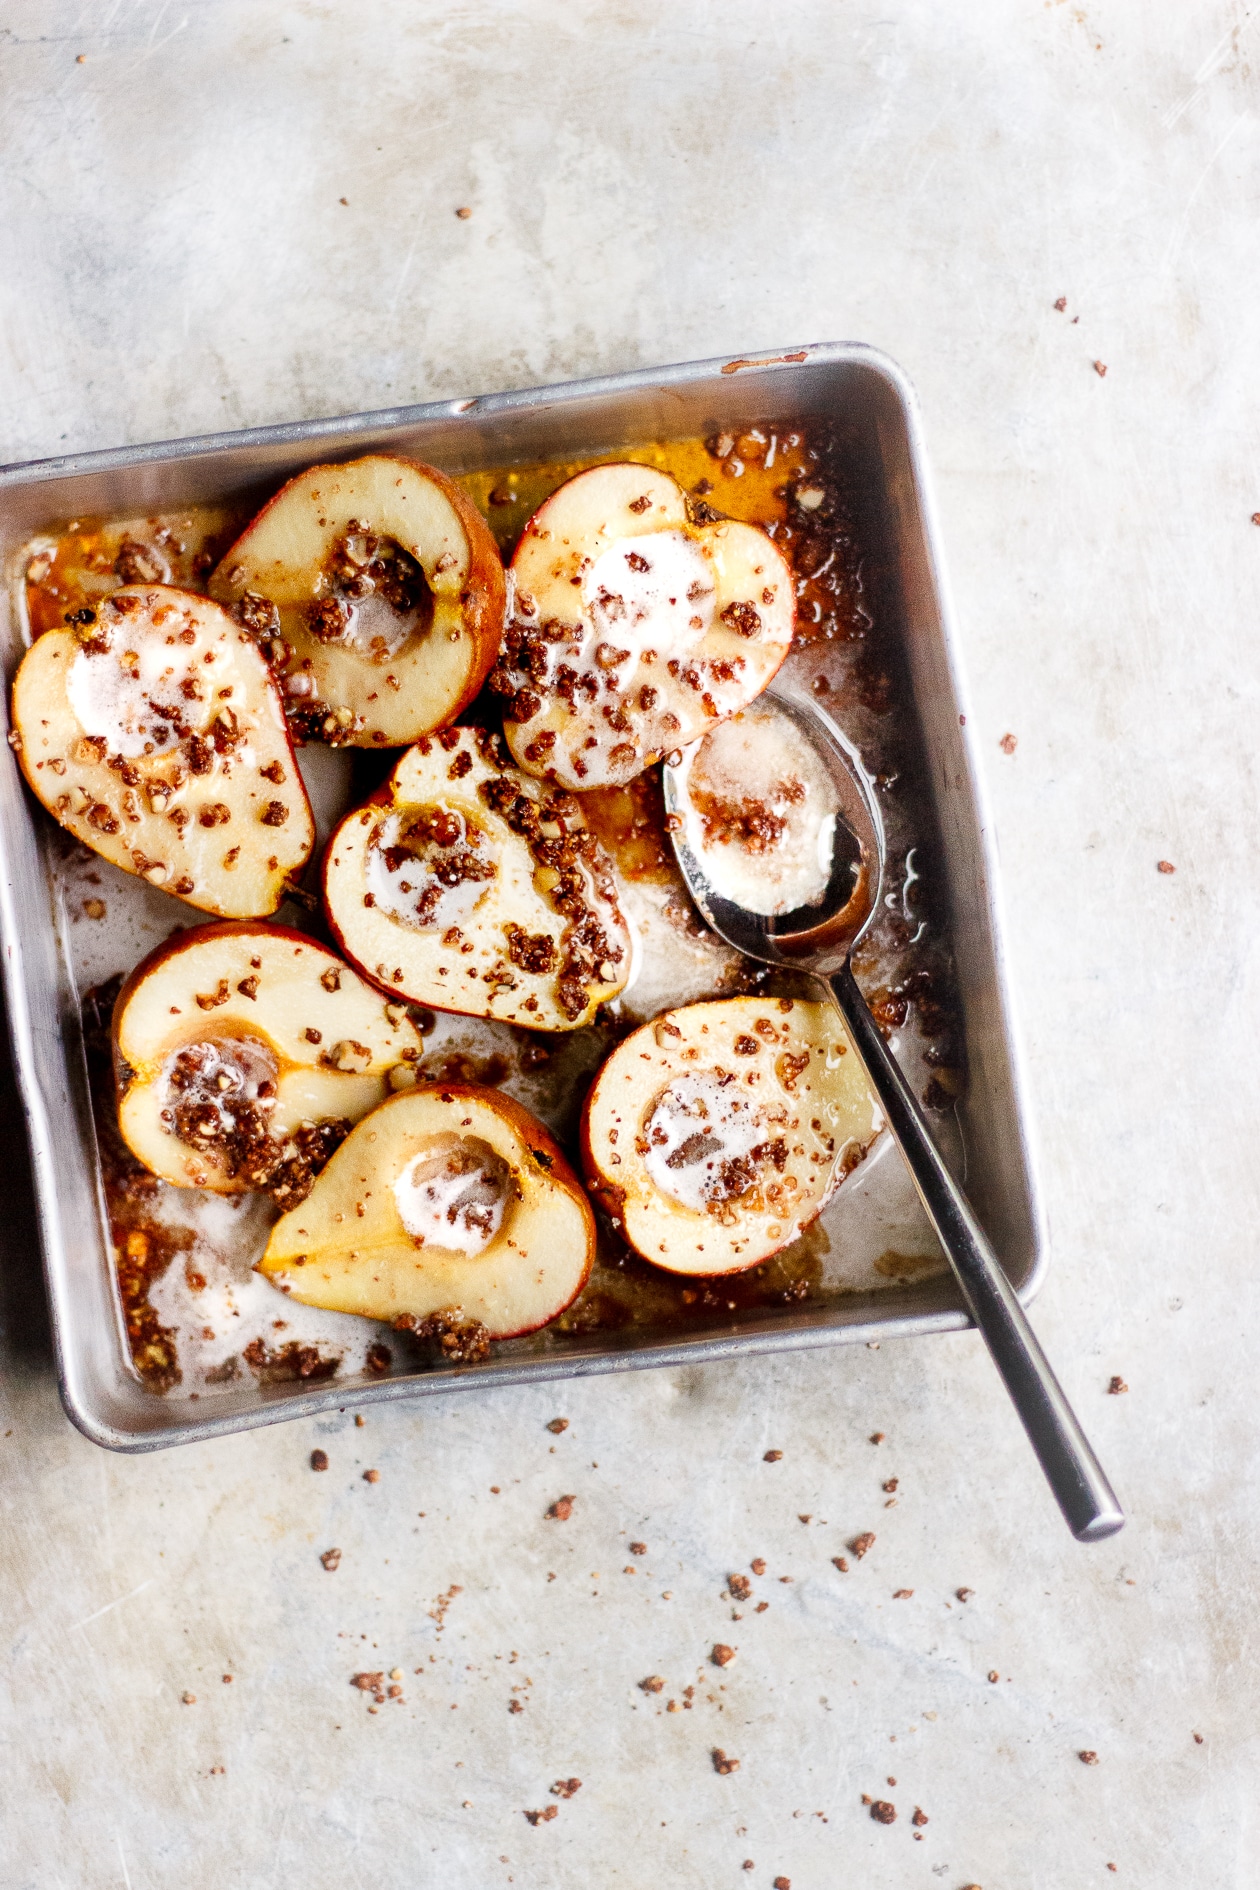 Maple Baked Pears with Chocolate Crumble + Coconut Cream | Maple baked pears with an easy crispy, chocolaty crumble topping. A vegan, refined sugar-free, gluten-free fall pear dessert.